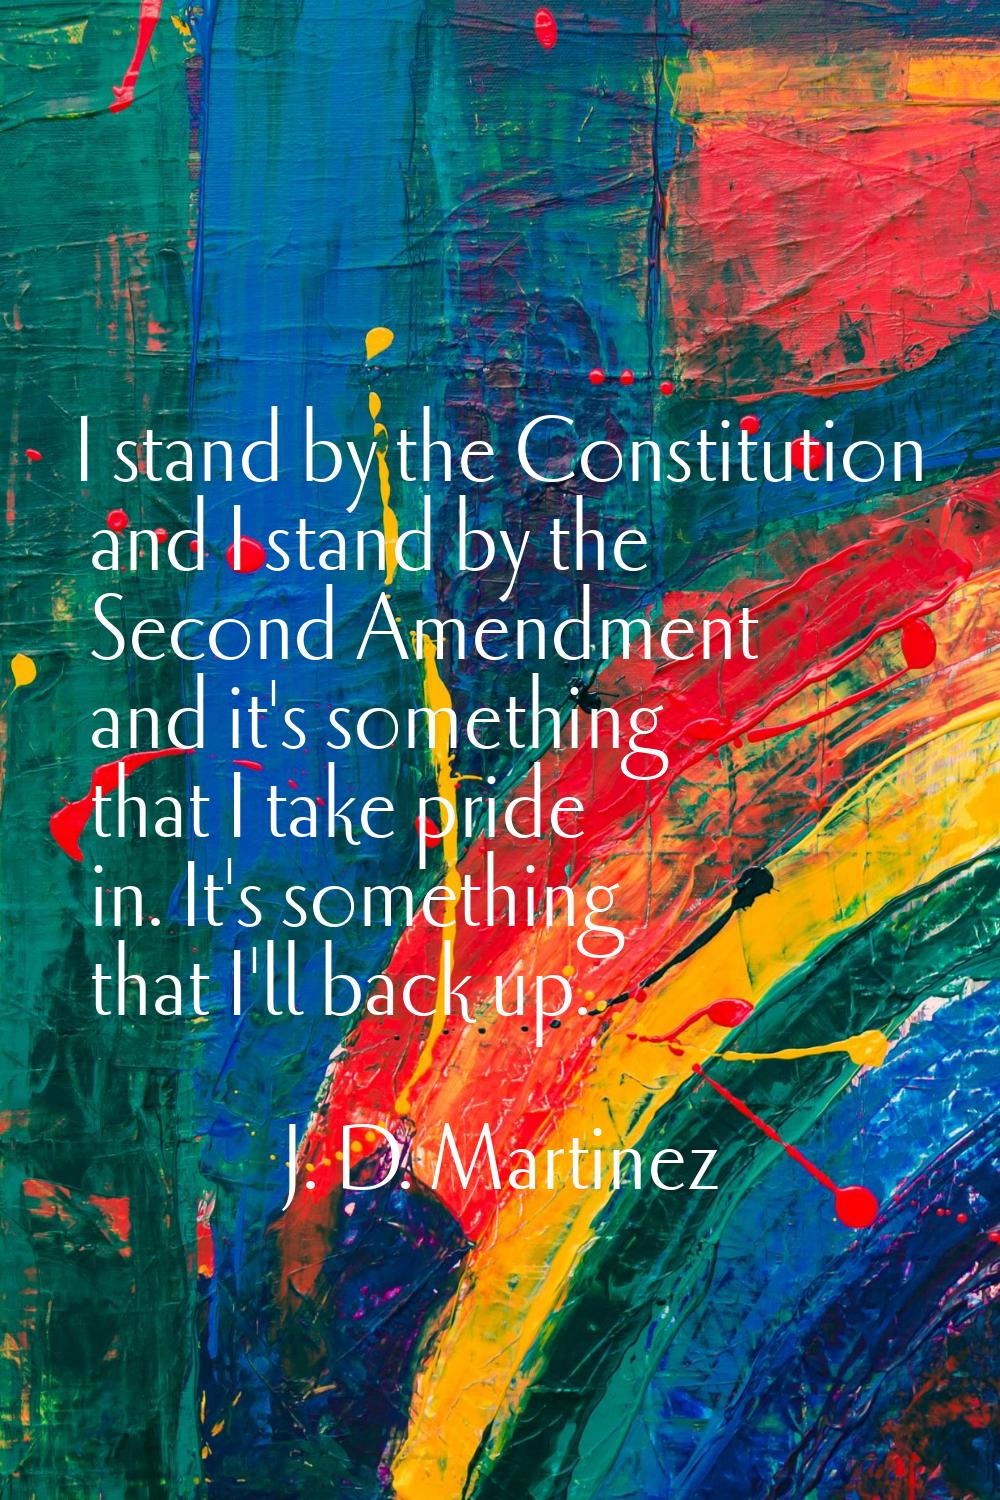 I stand by the Constitution and I stand by the Second Amendment and it's something that I take prid